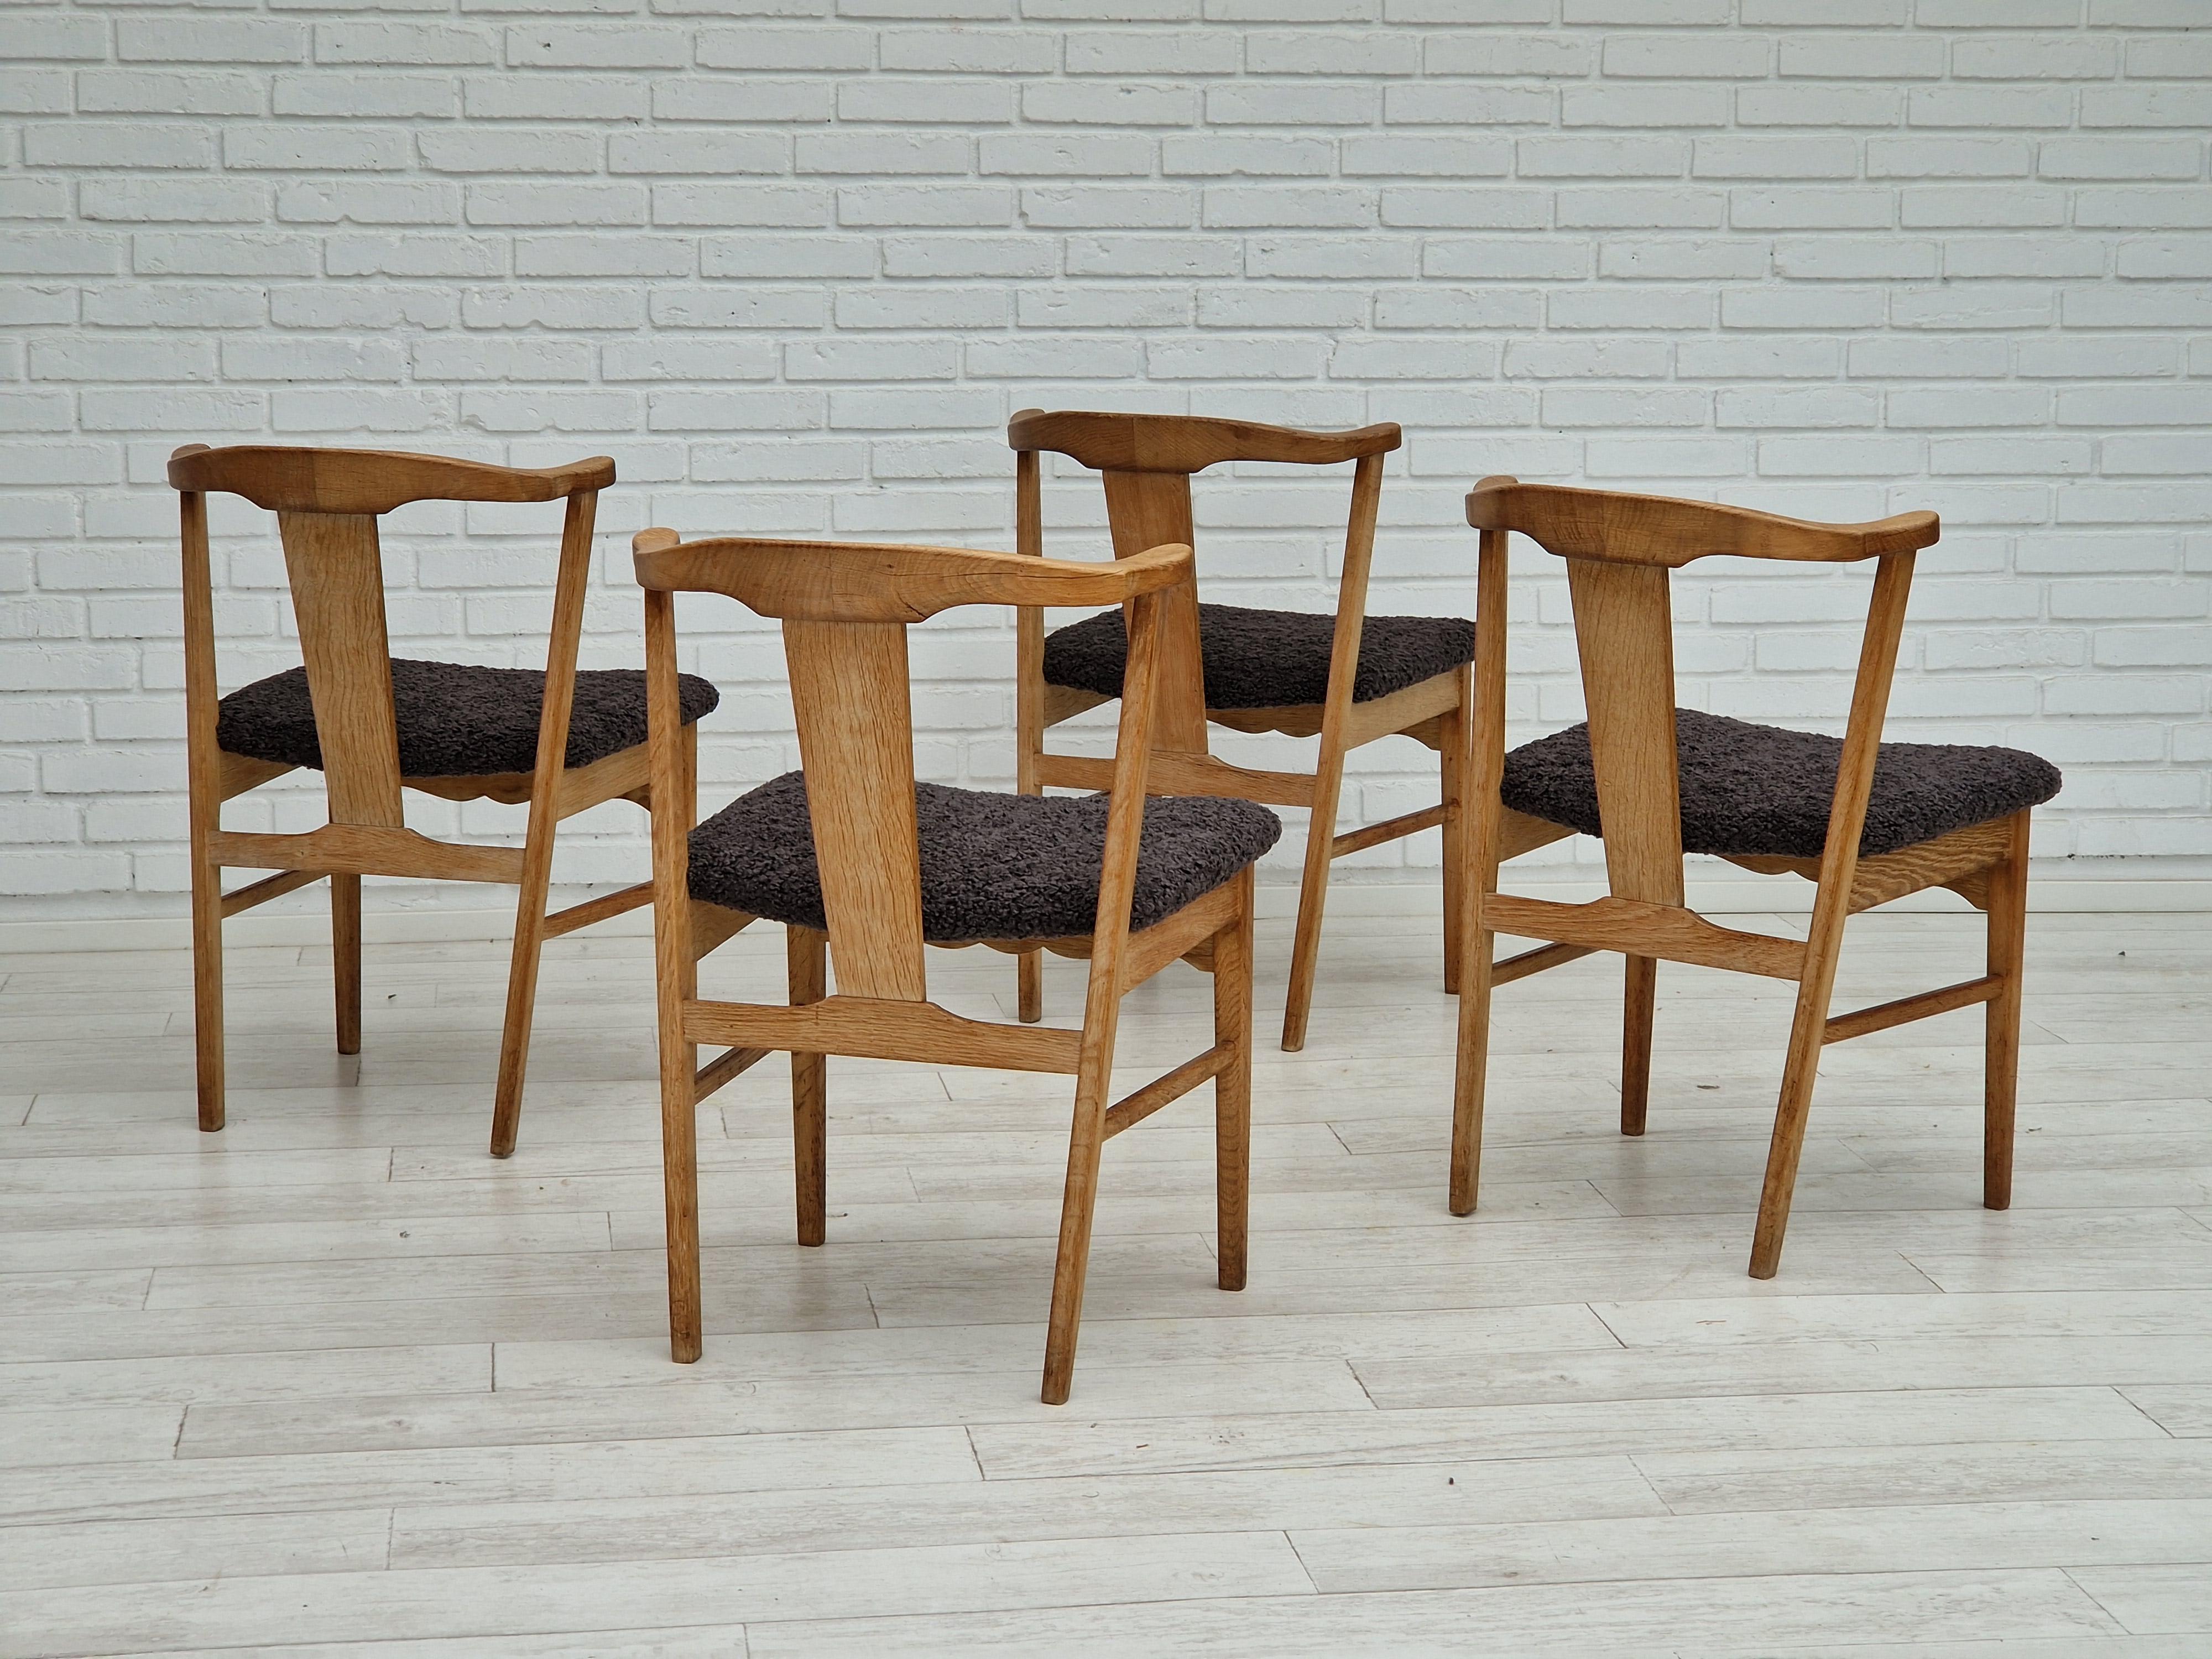 Mid-20th Century 1960s, Danish Design, Set of 4 Dinning Chairs, Oak Wood, Reupholstered For Sale